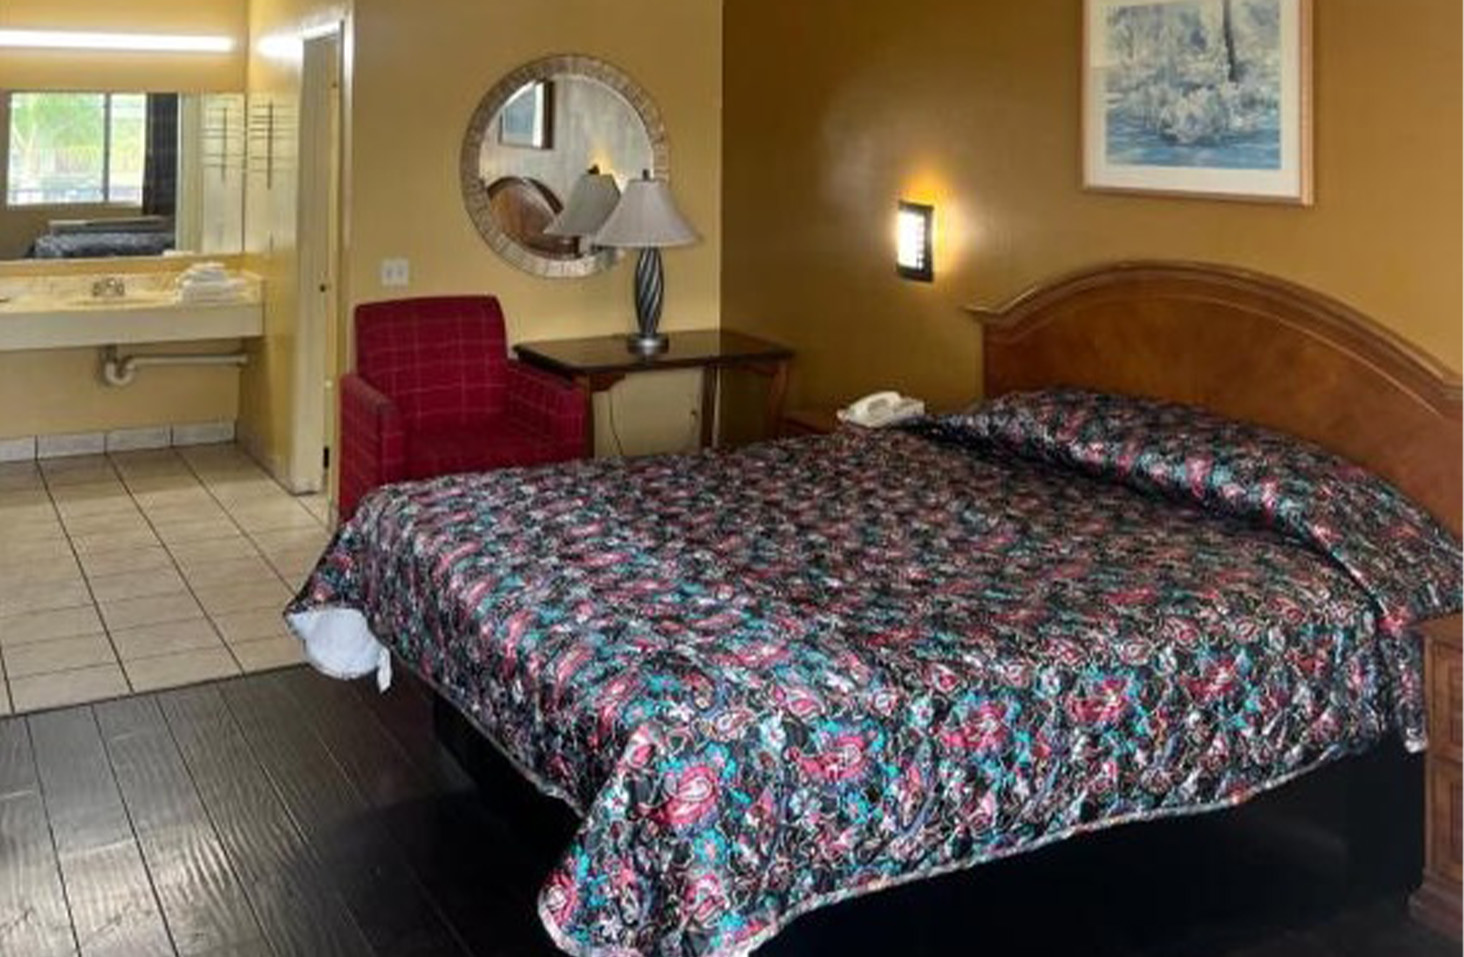  Explore Our Guest Rooms 